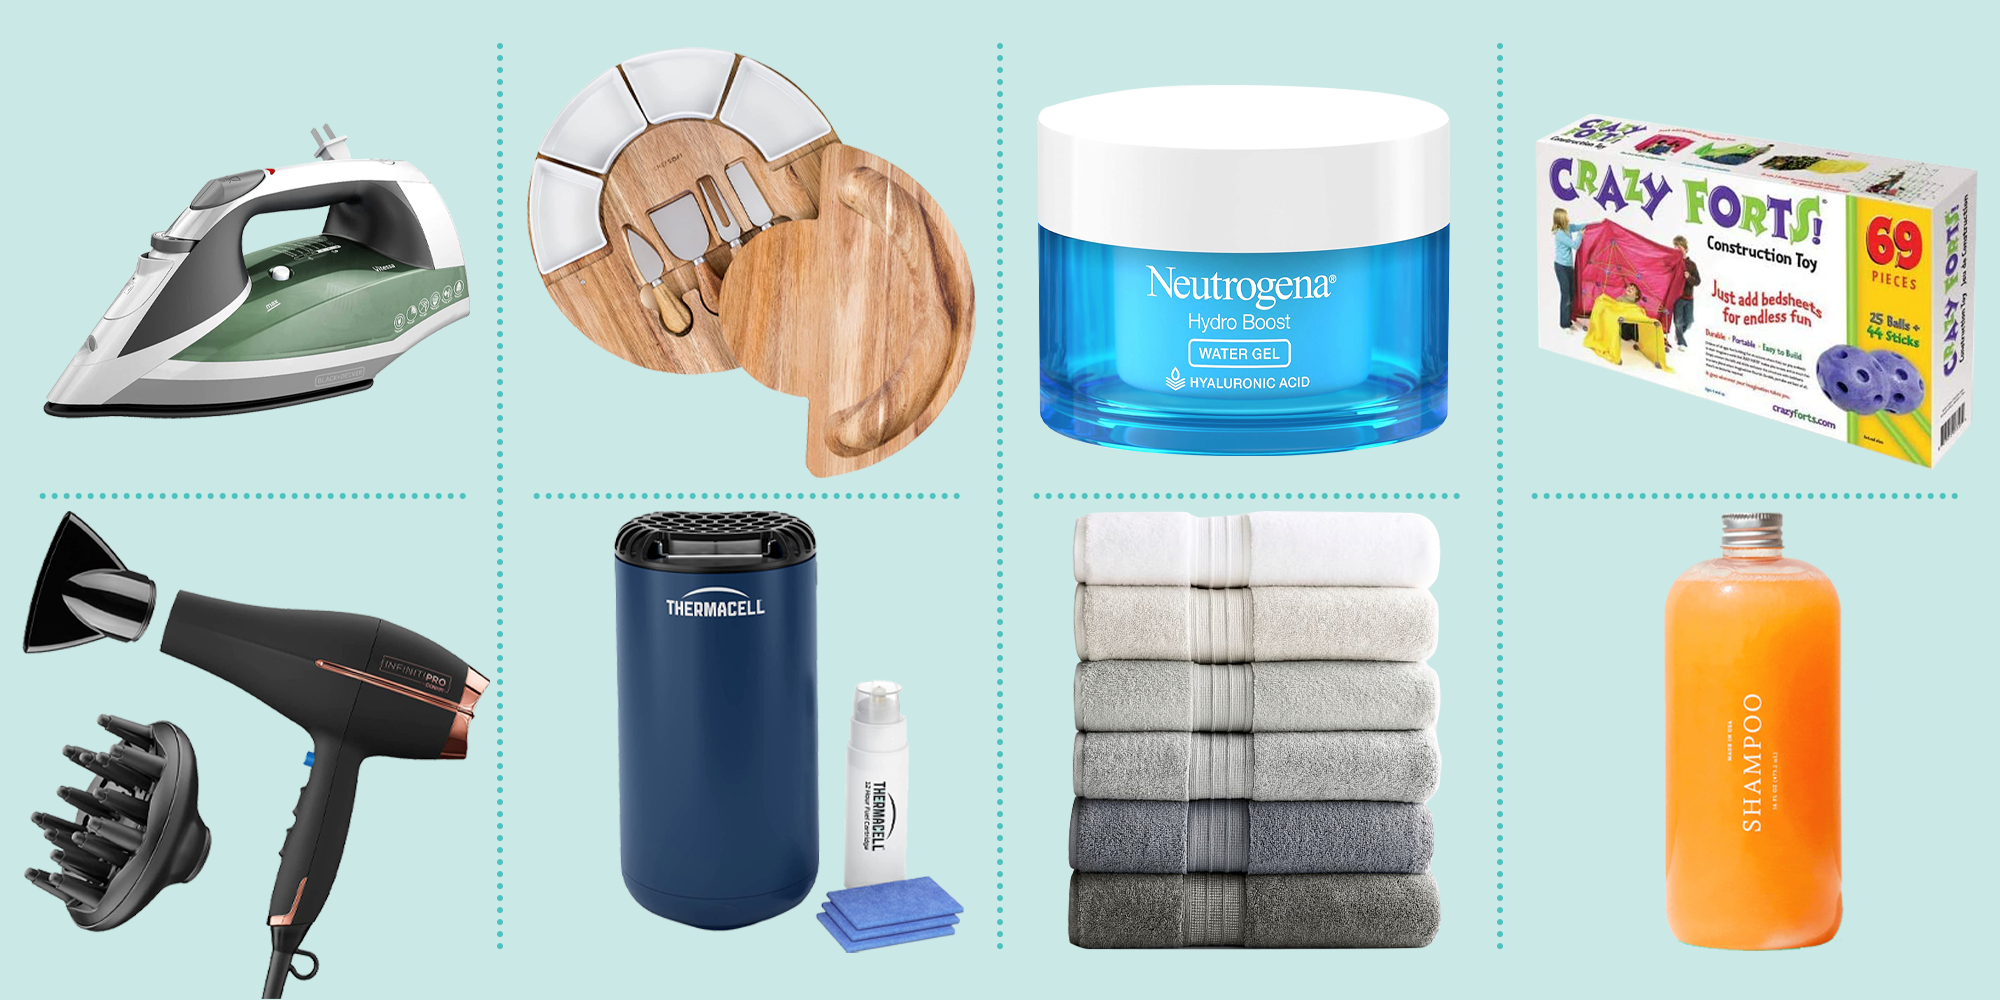 Good Housekeeping Most Popular Products of September 2021